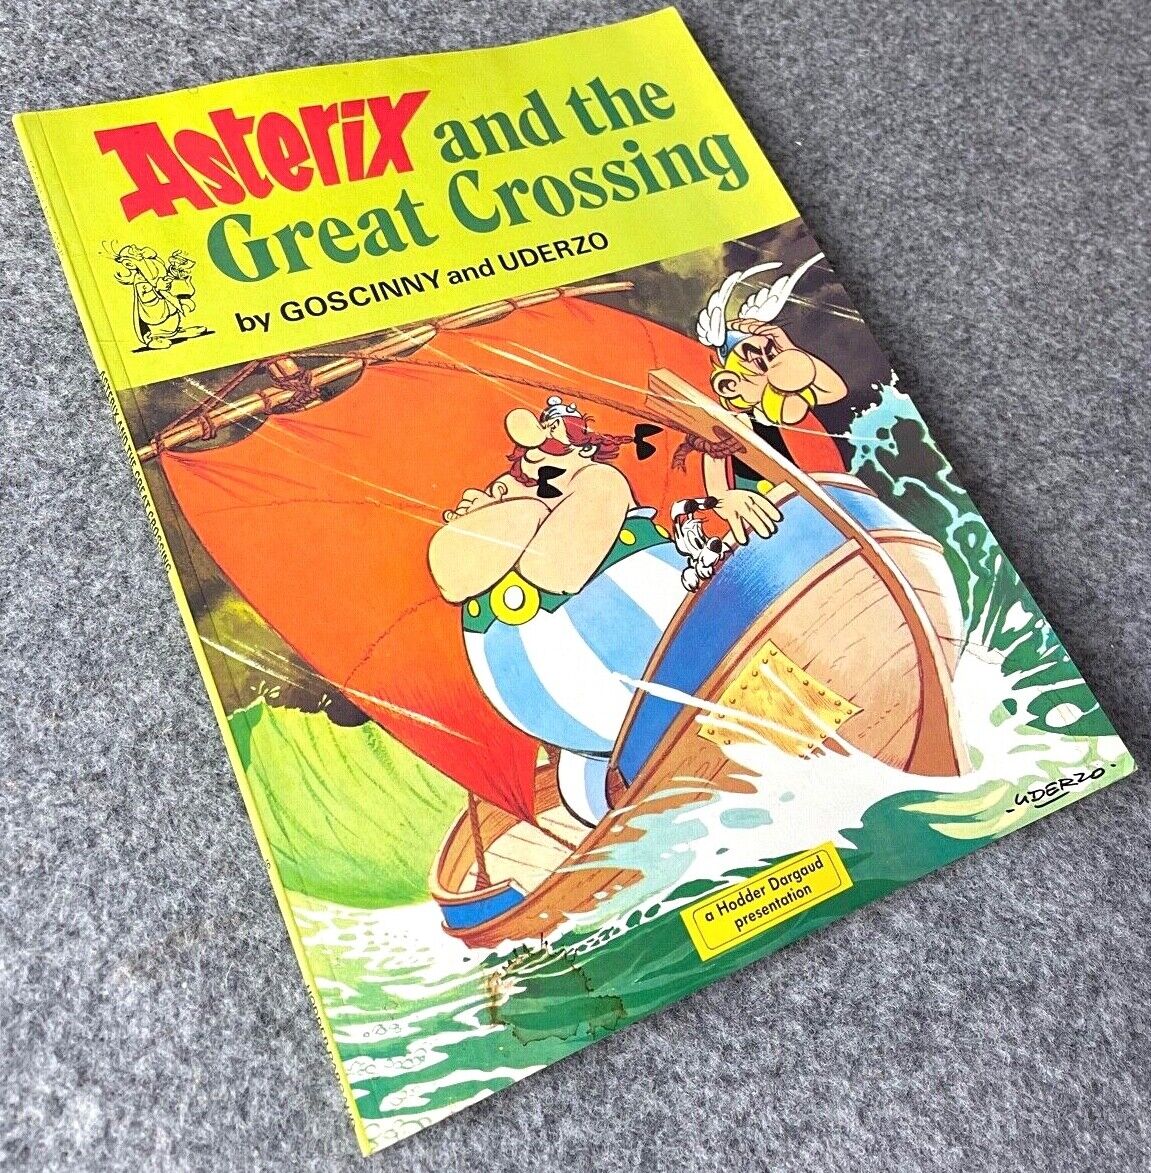 Asterix & the Great Crossing - 1970/80s Hodder/Dargaud UK Edition Paperback Book Uderzo